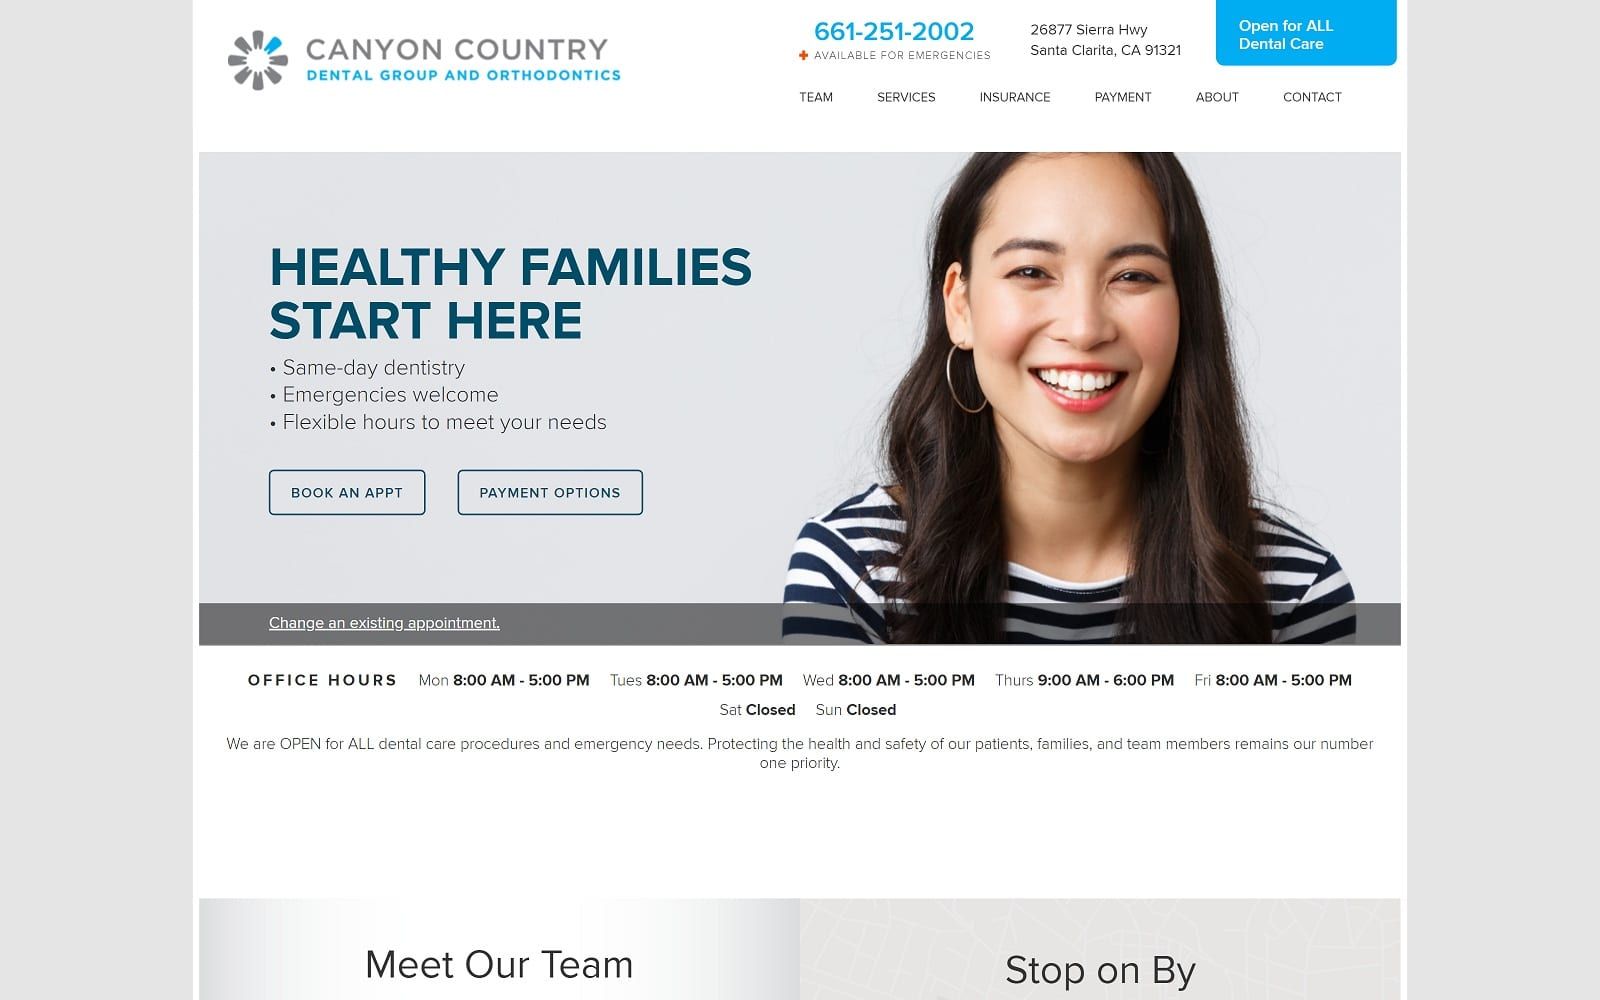 The screenshot of canyon country dental group and orthodontics canyoncountrydentalgroup. Com website